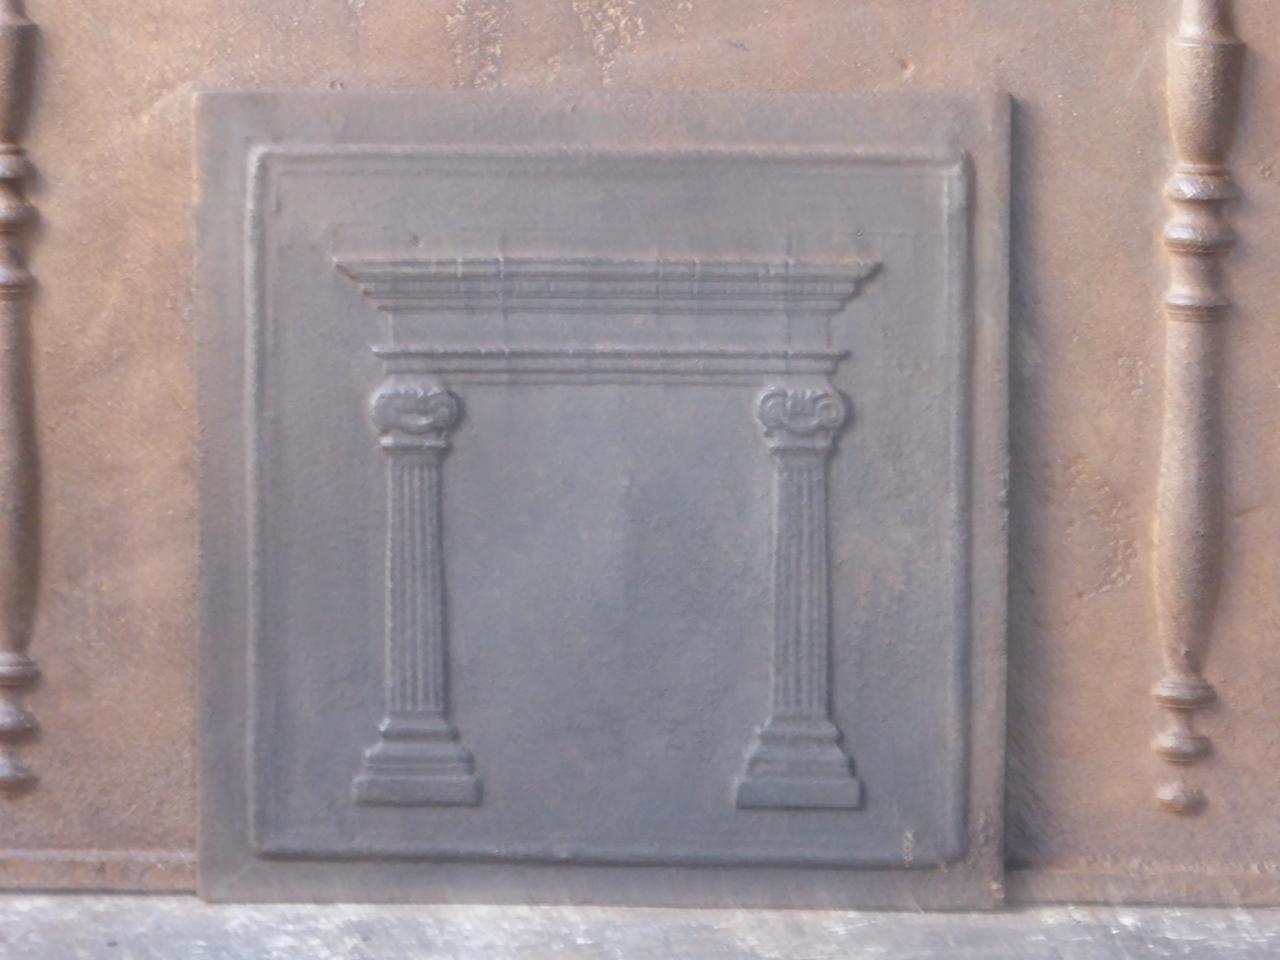 19th century French neoclassical fireback with two pillars of a temple. The pillars symbolize liberty, one of the three values of the French revolution. The fireback is made of cast iron. It has a natural brown patina, which can be made black upon